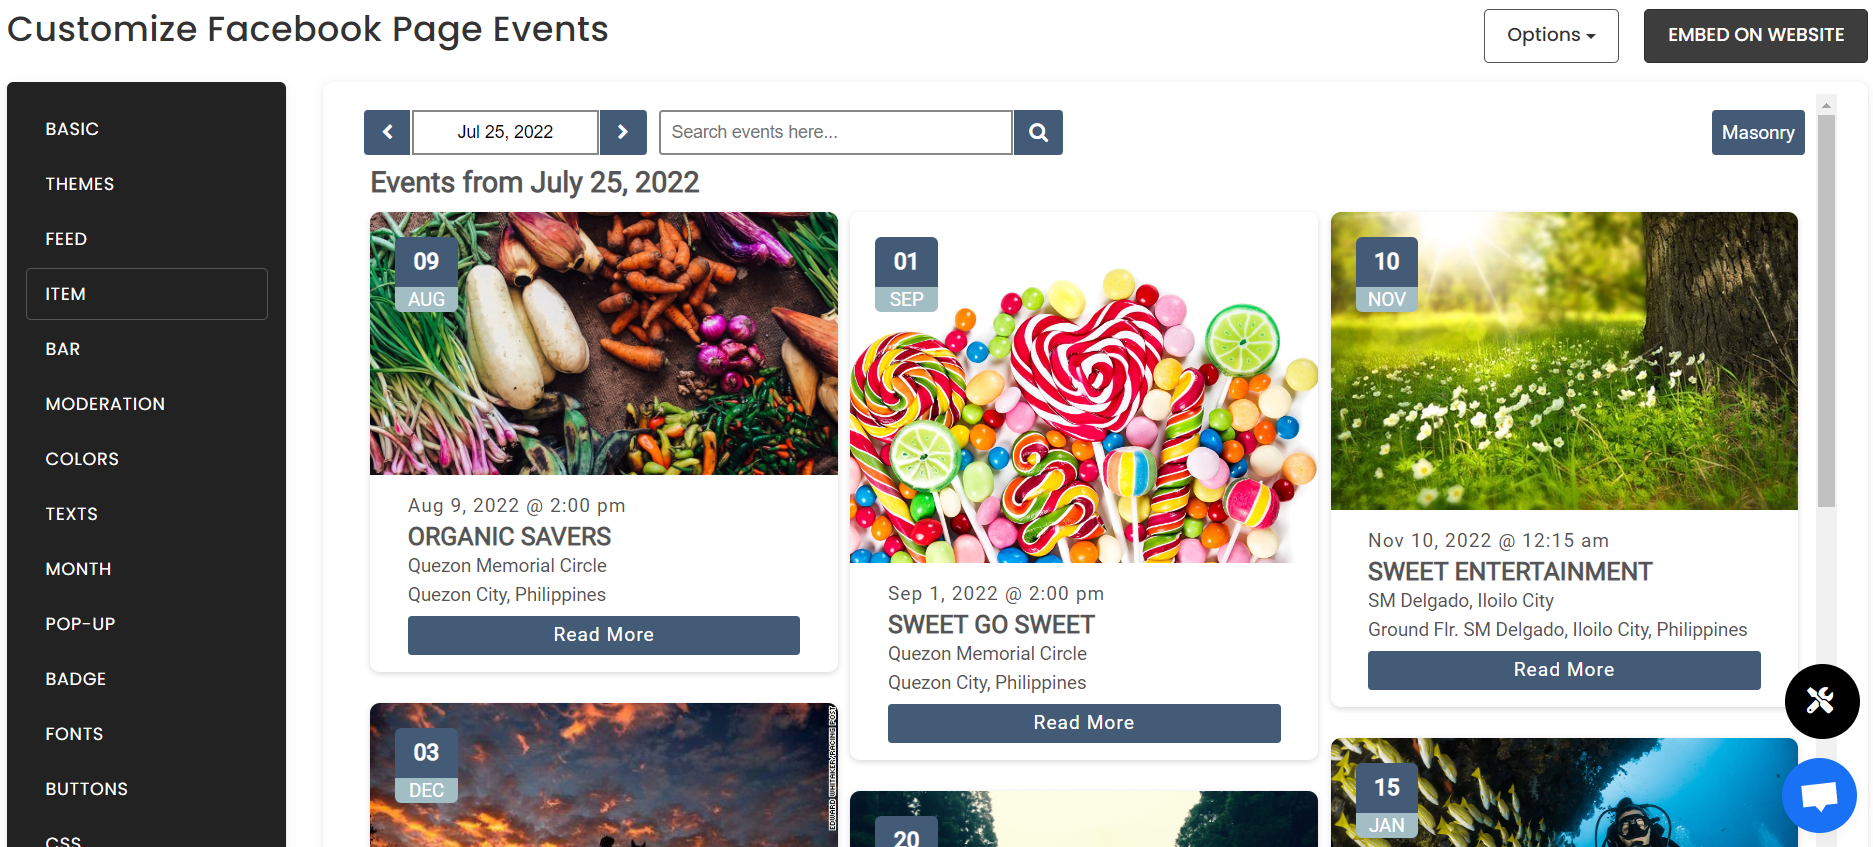 Customize your feed - How To Embed Facebook Page Events On Weebly Website For Free?